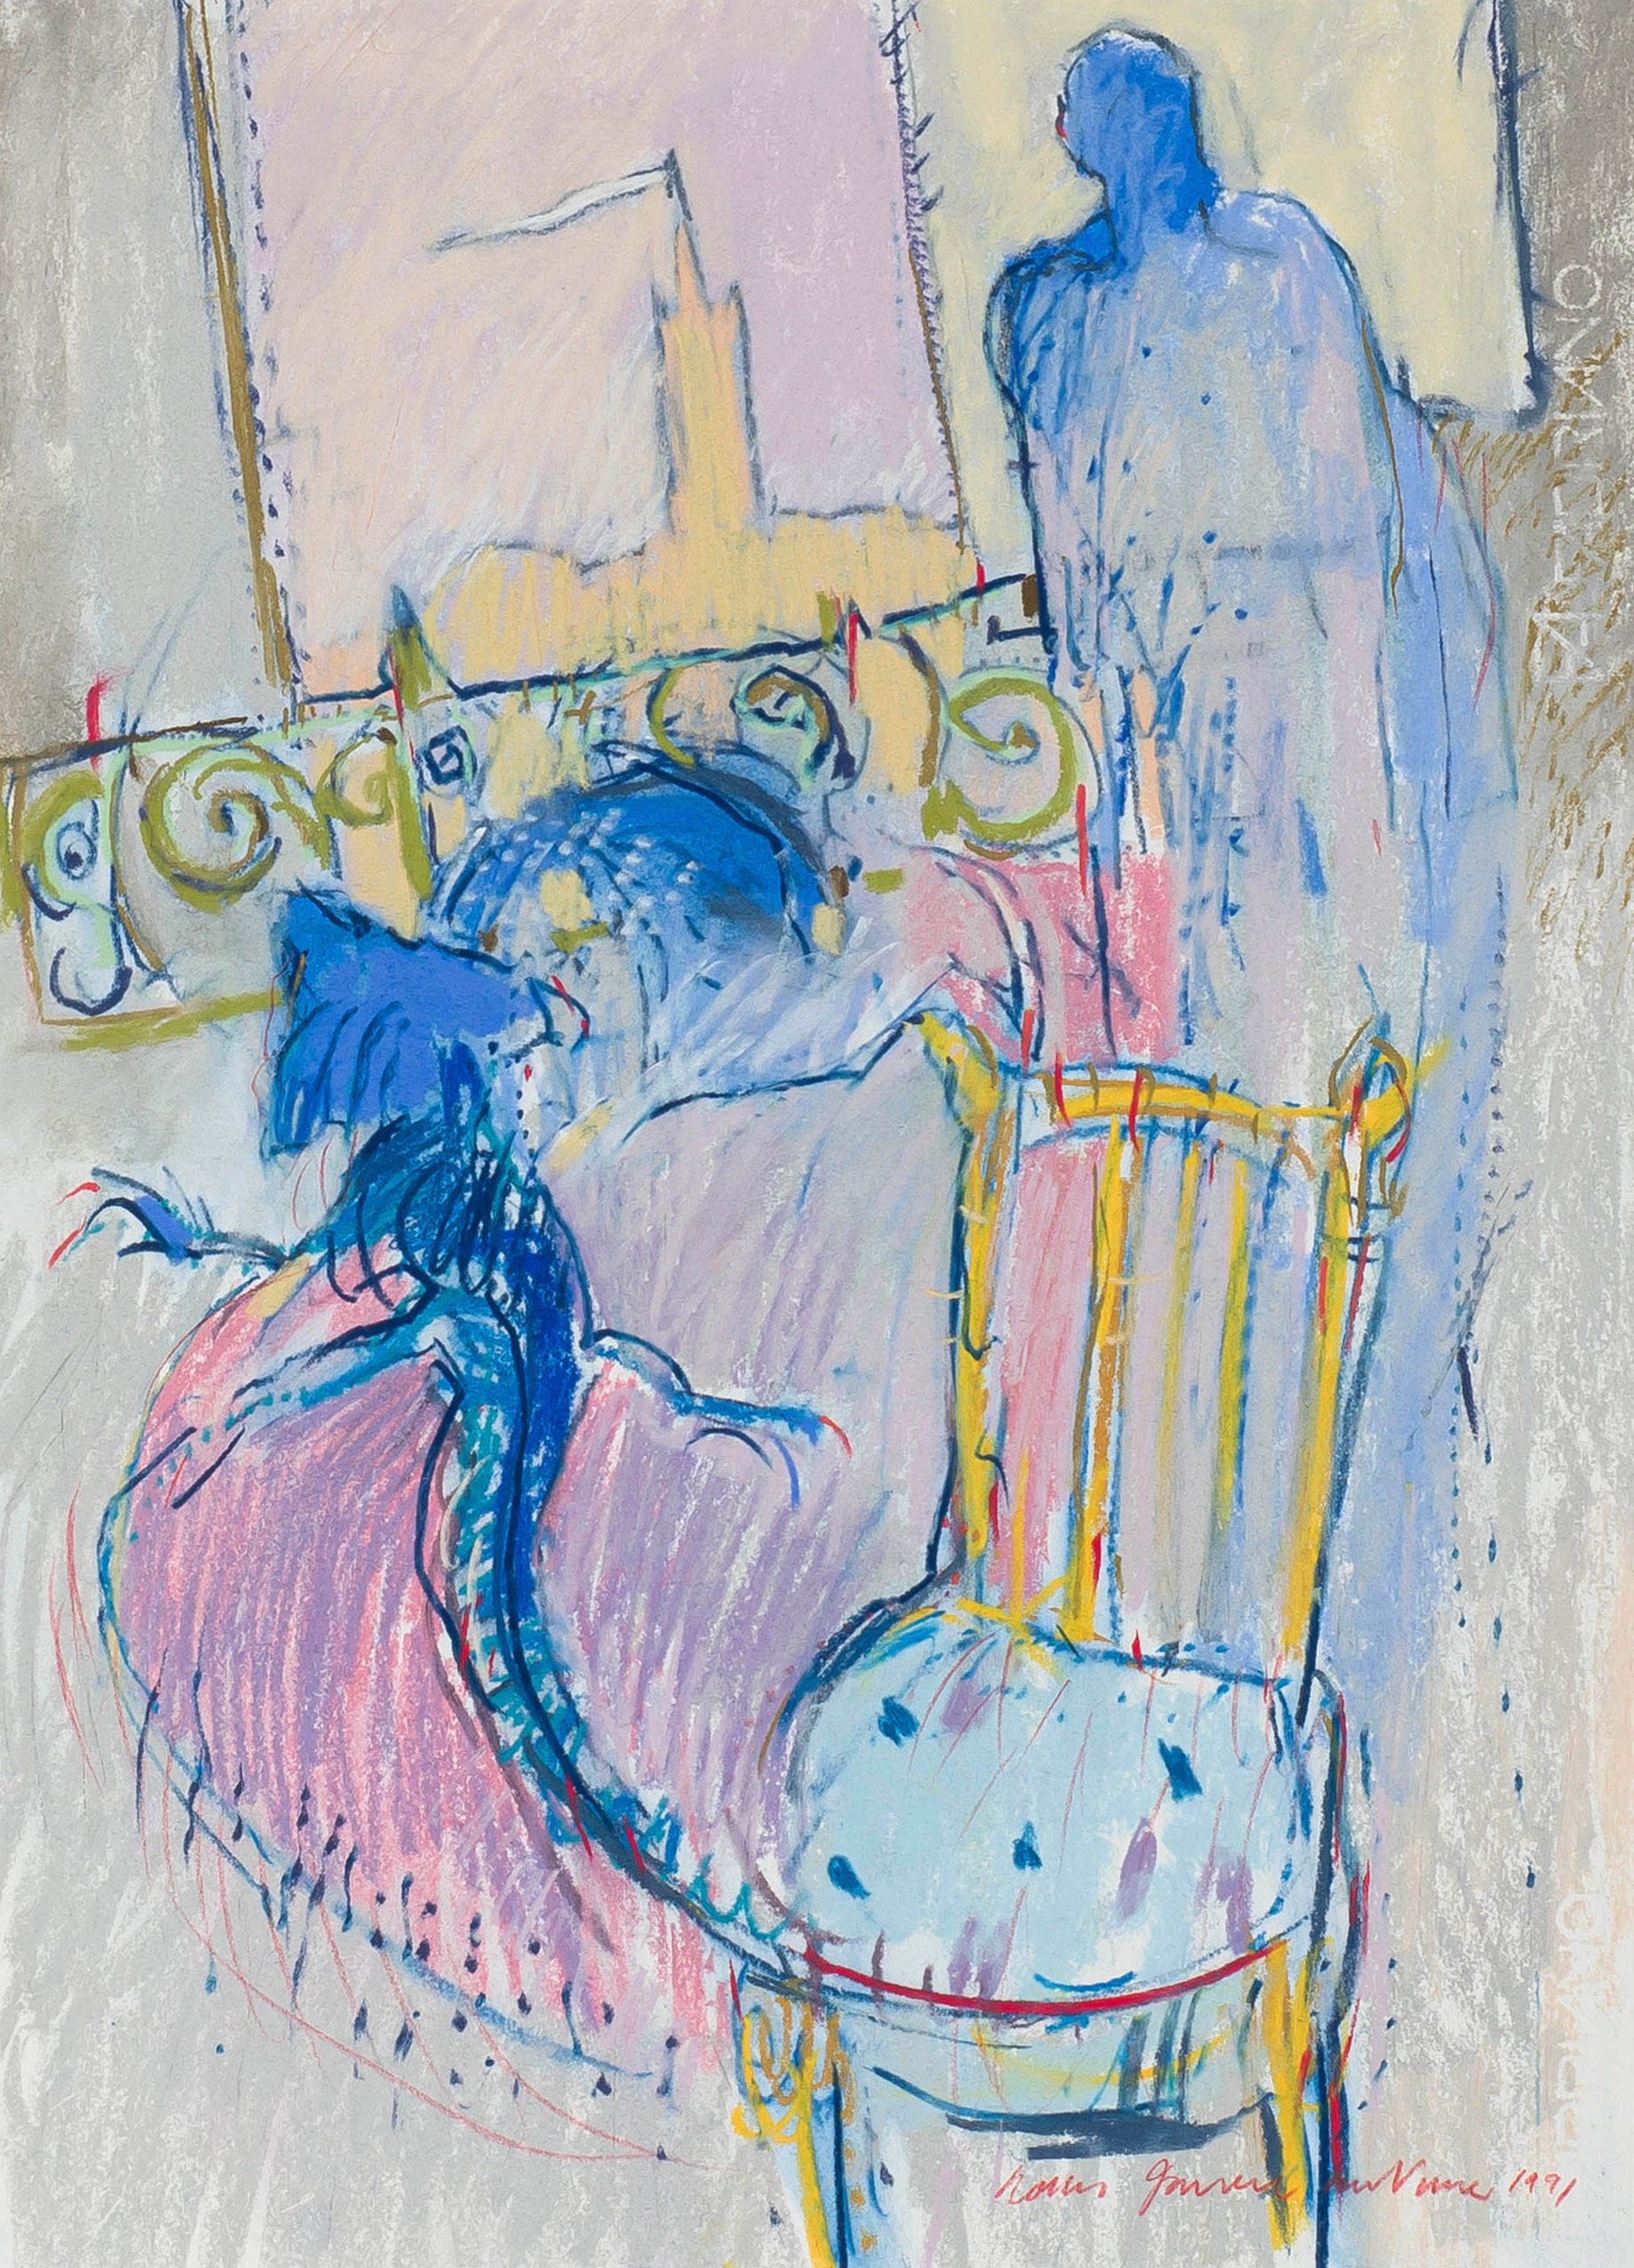 Interior with Chair and Blue Reptile by Louis Jansen van Vuuren, dated 1991